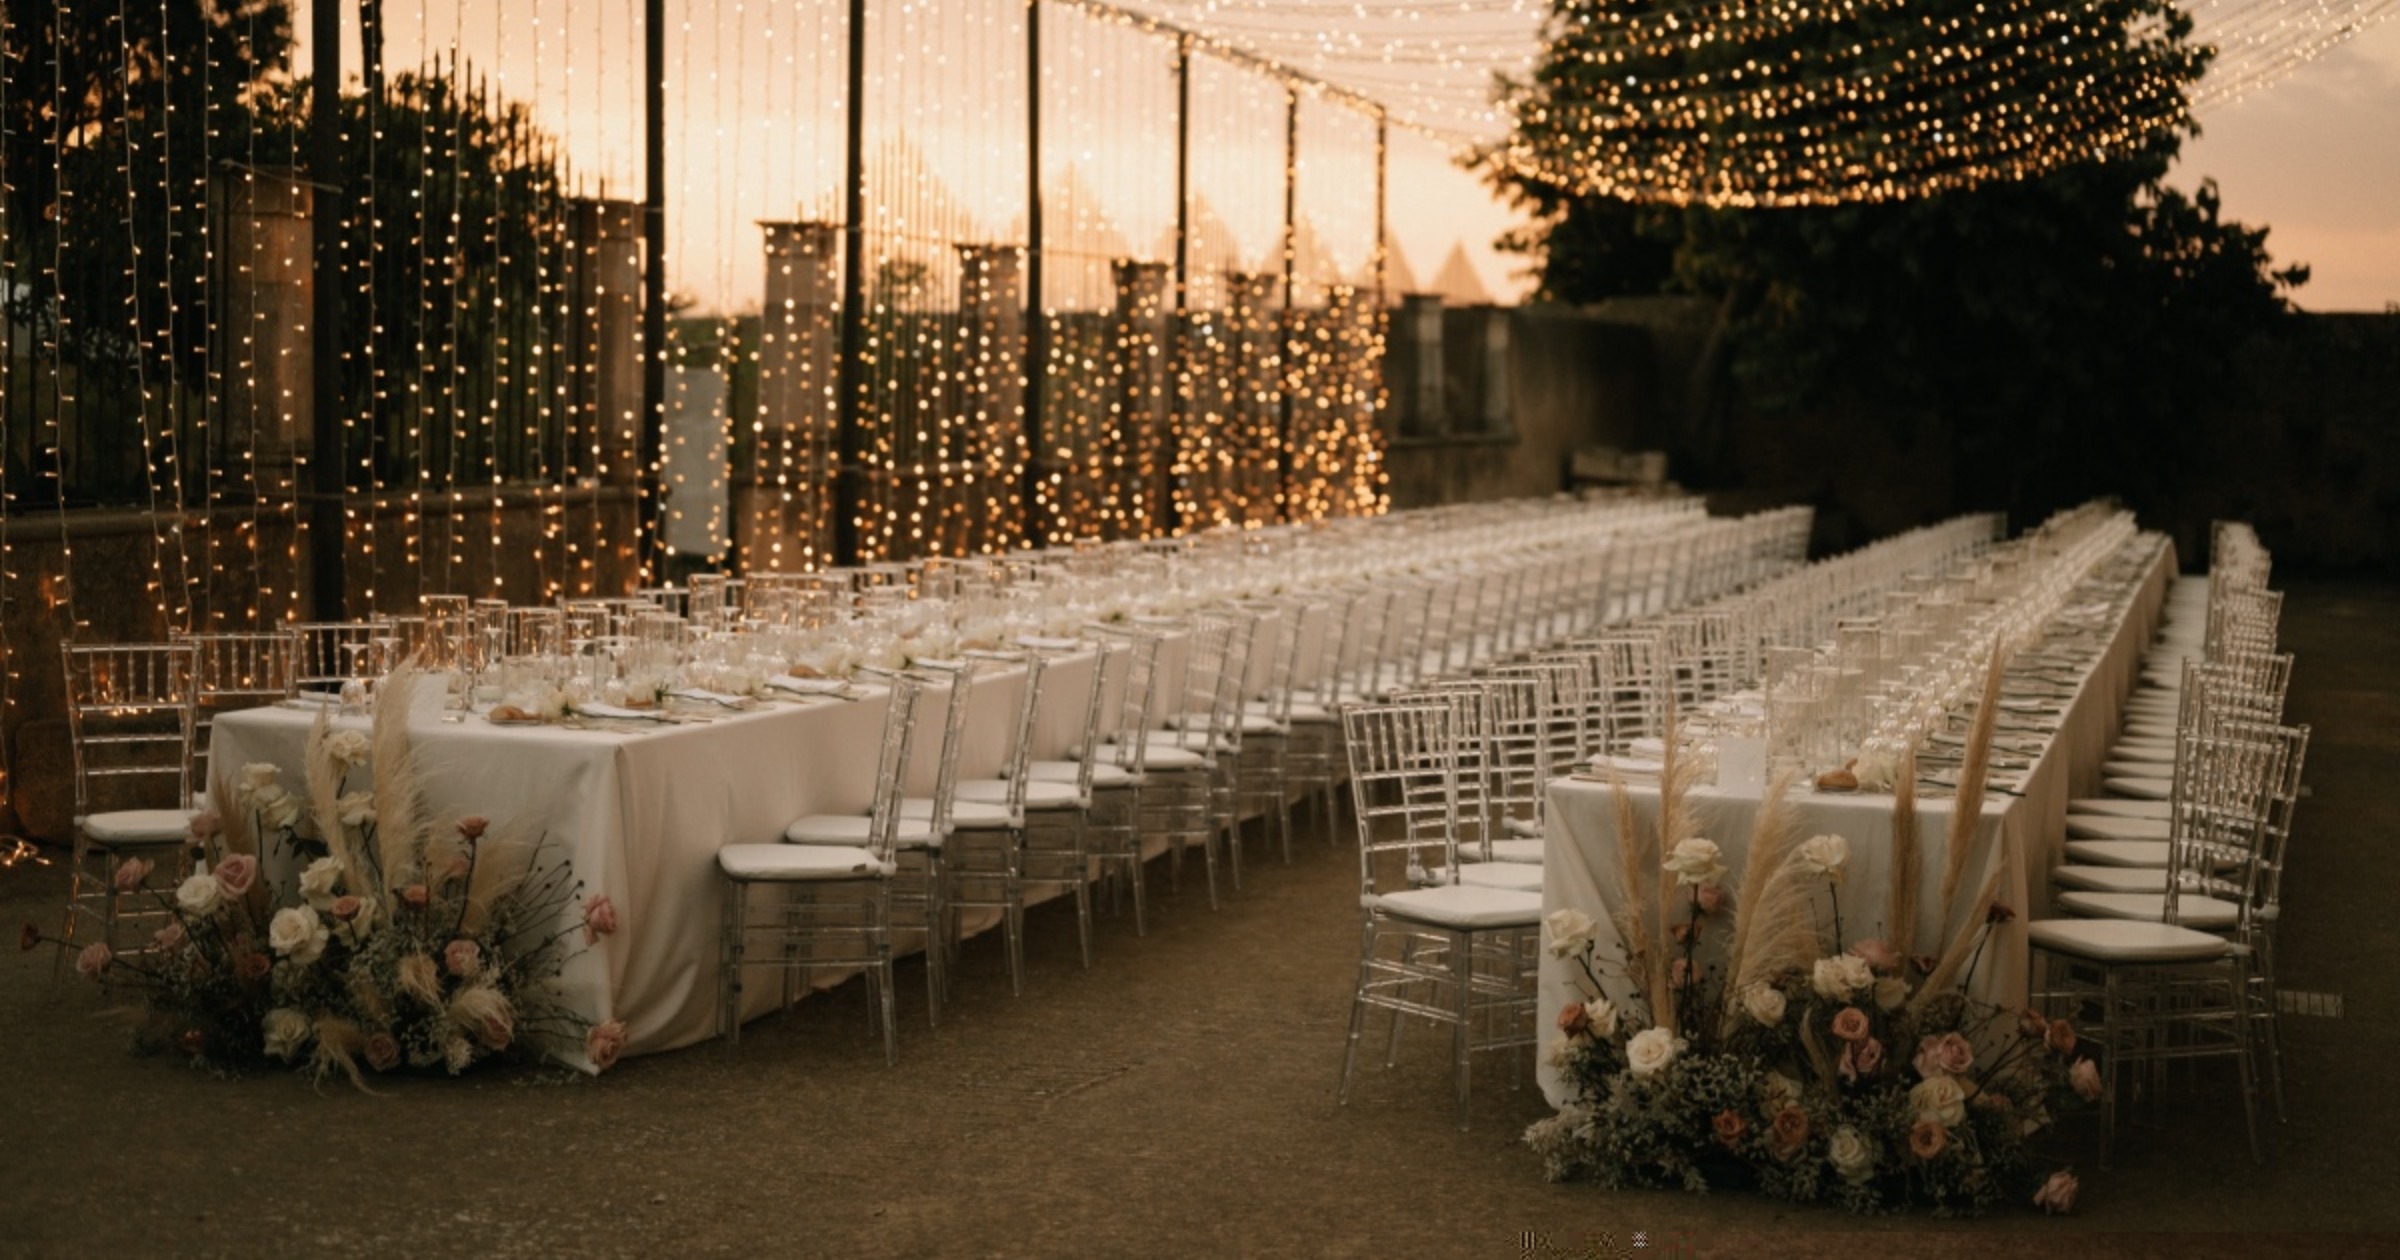 Summer in Sicily Was Perfect for this Romantic Winery Wedding